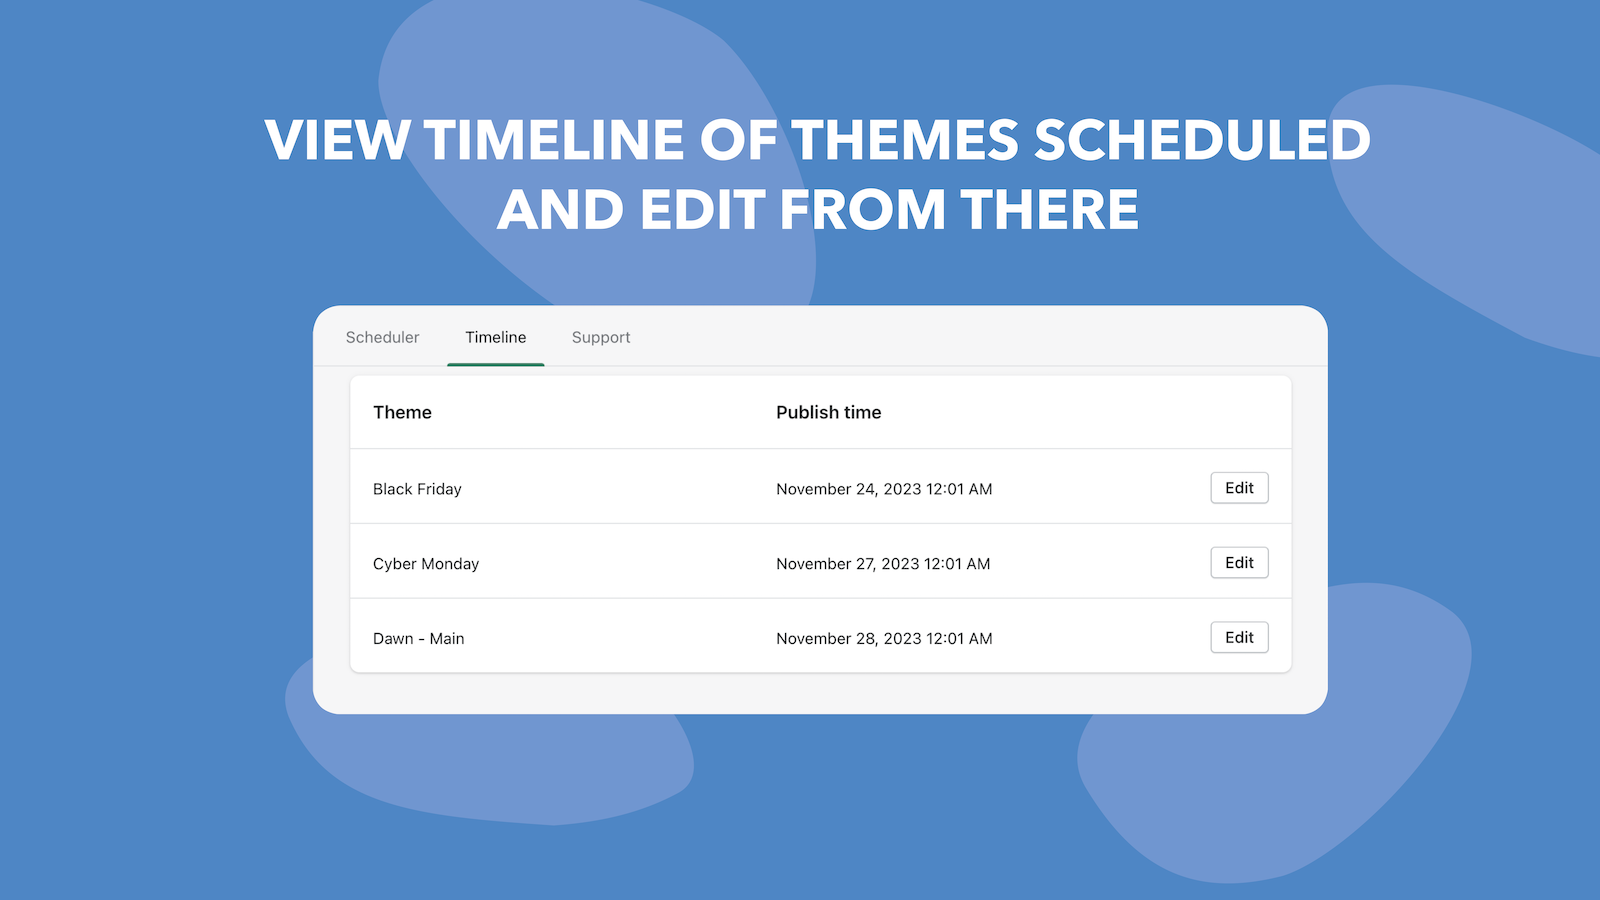 Easy access timeline of scheduled themes